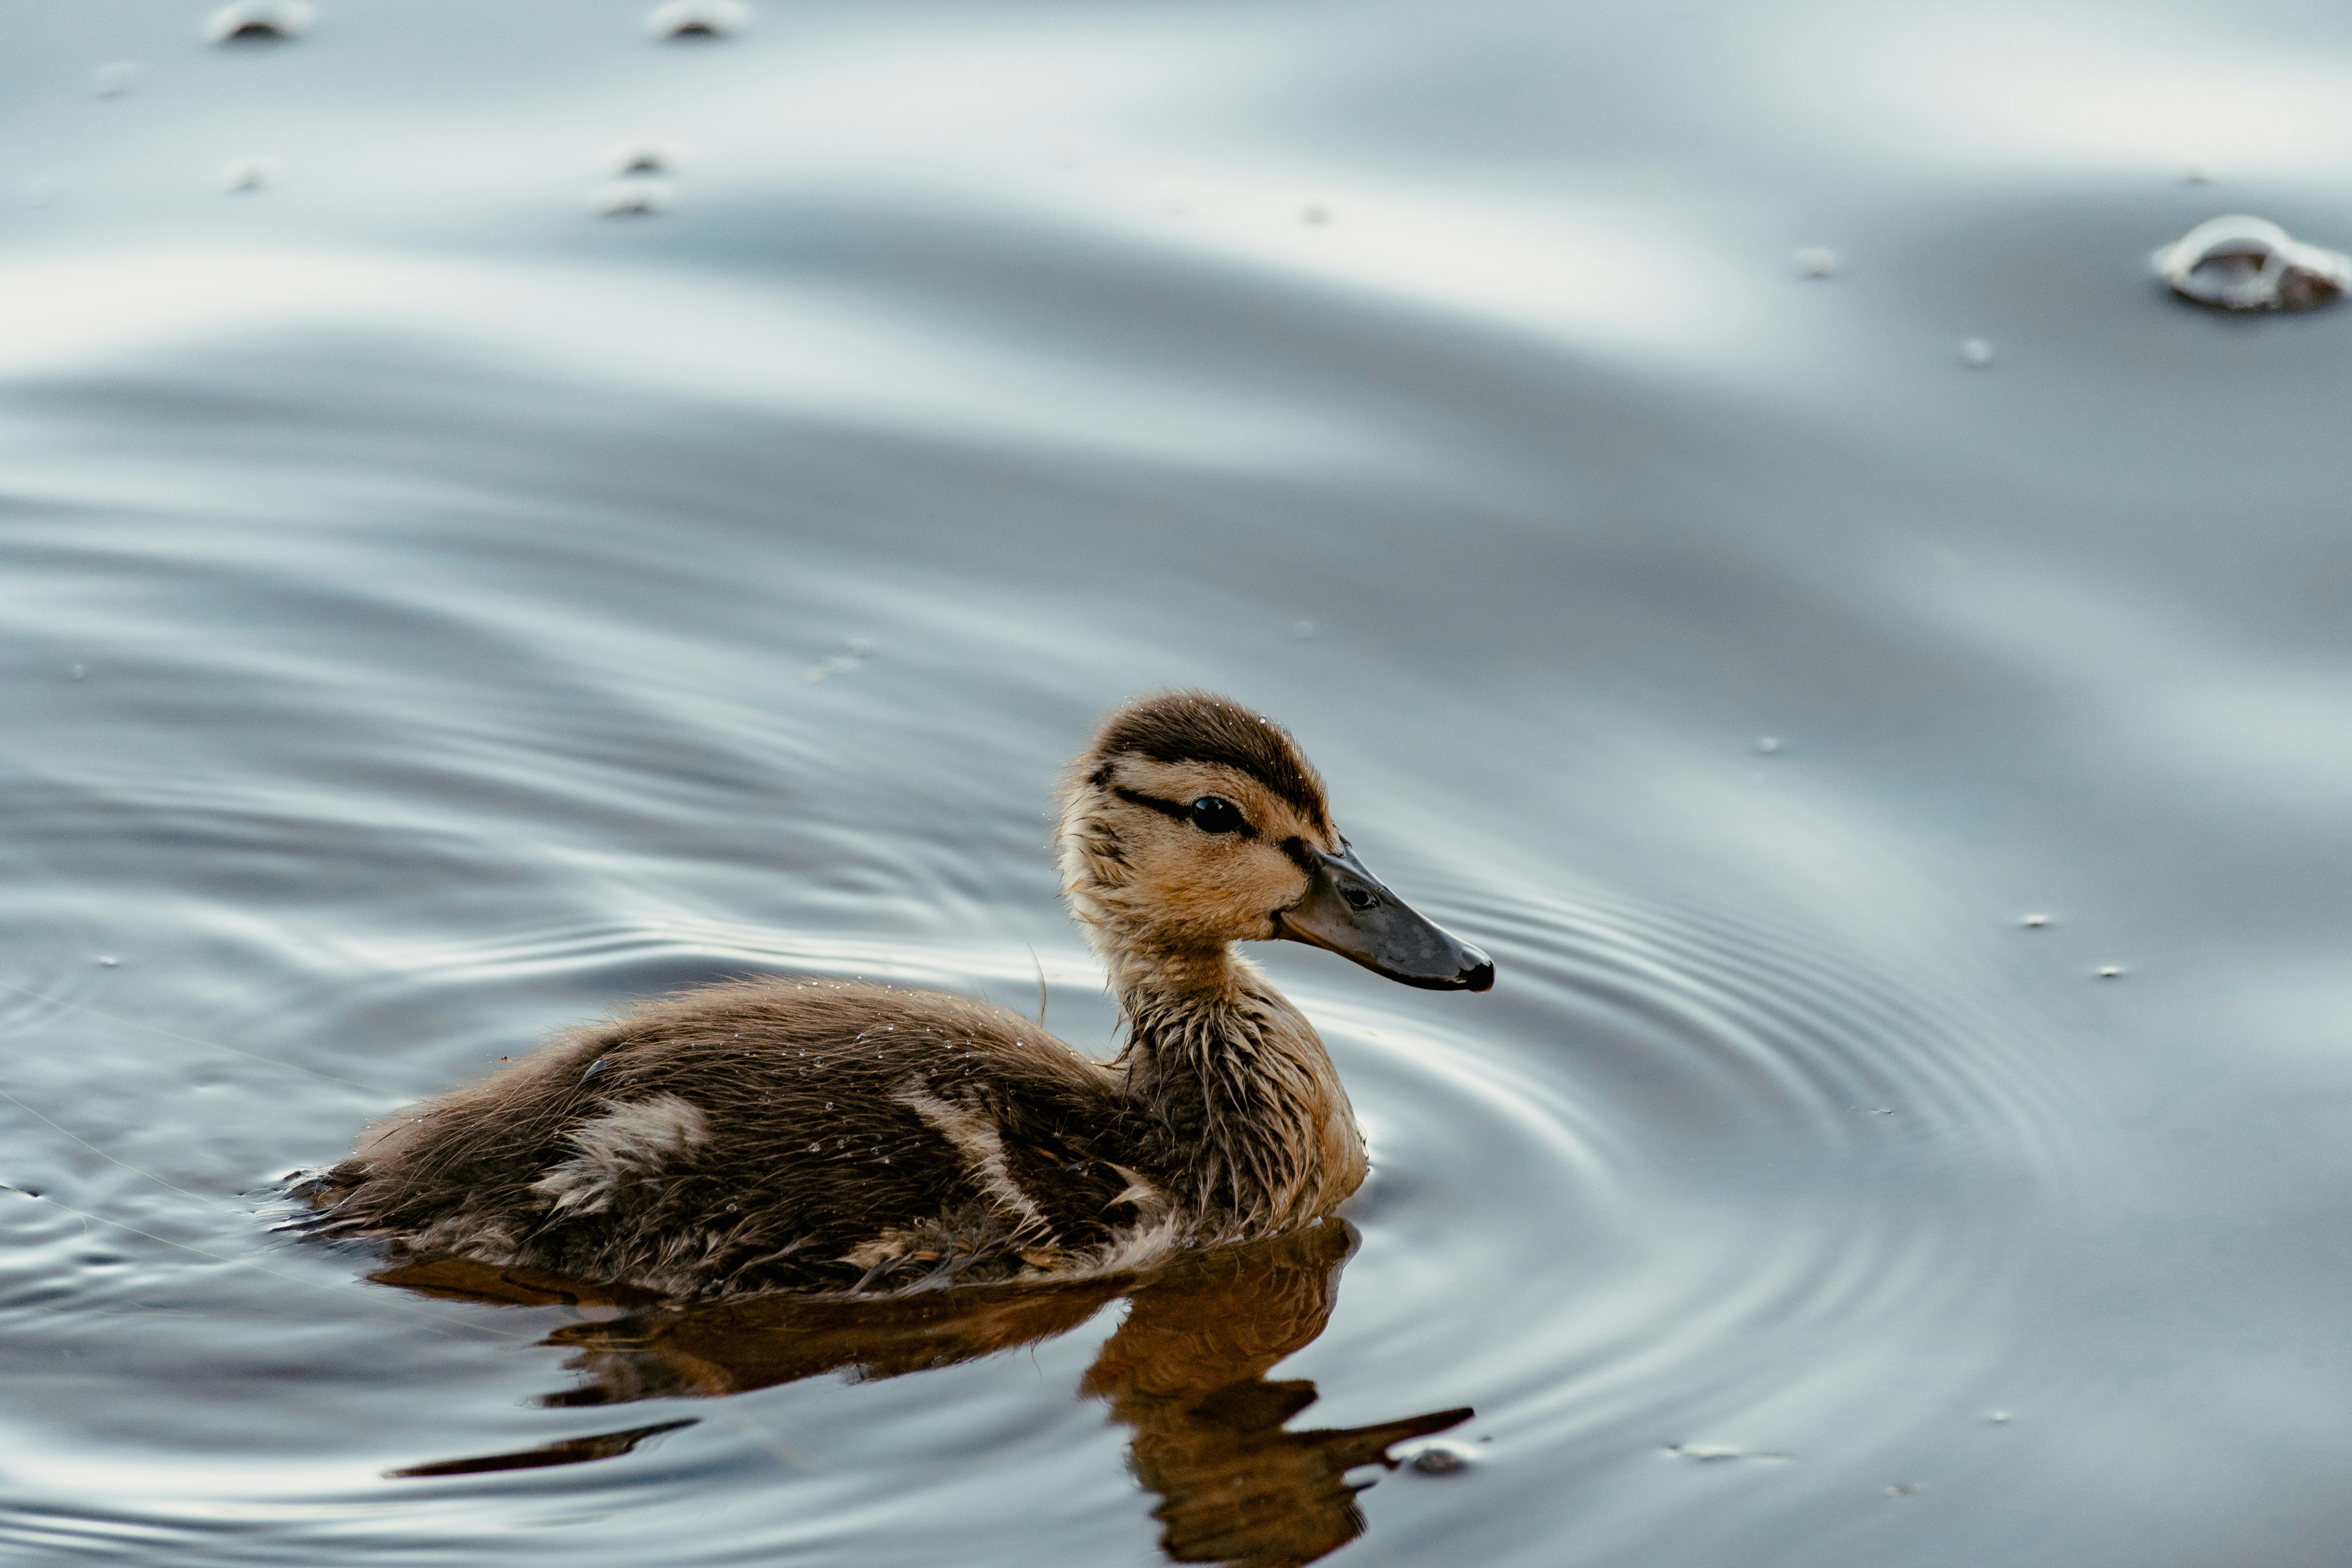 duckling on water